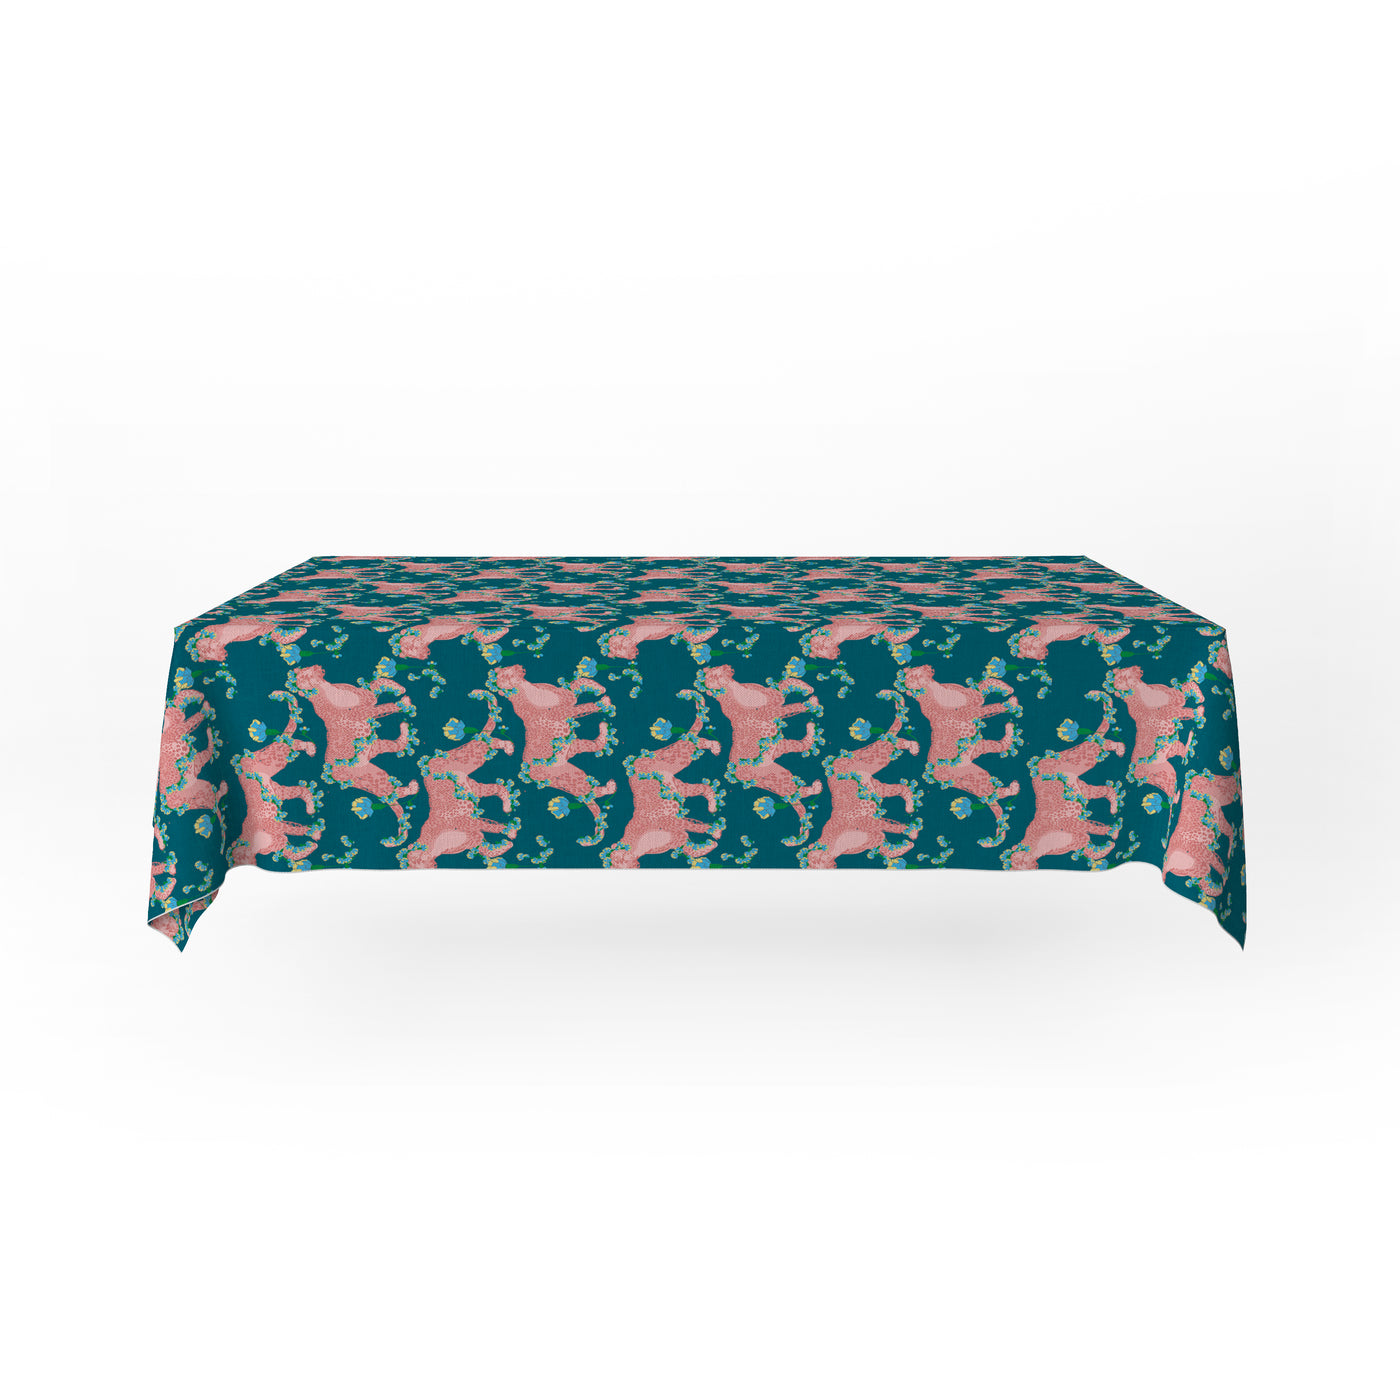 Flat shot of cotton tablecloth shown over table, dark teal base with repeating big cat pattern and carnation floral detailing